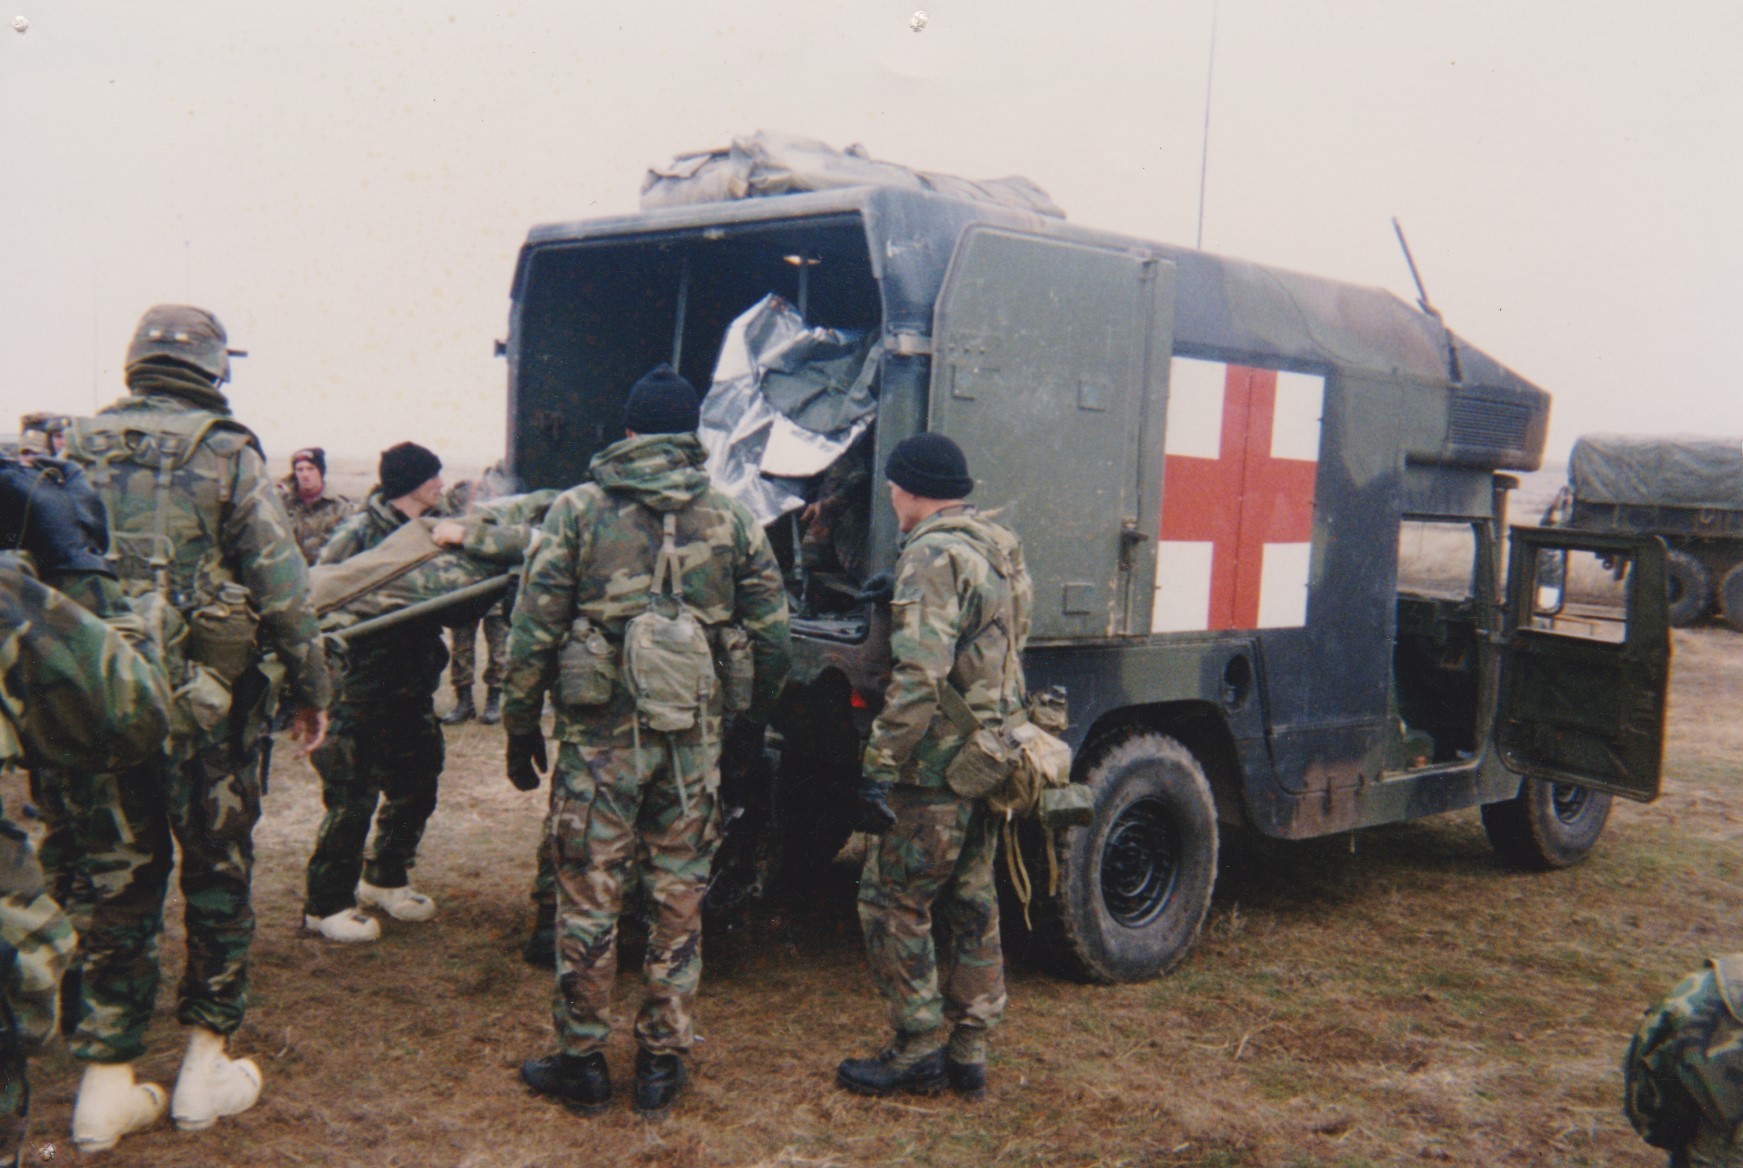 Loading Patient during exercise in Romania 
1998.